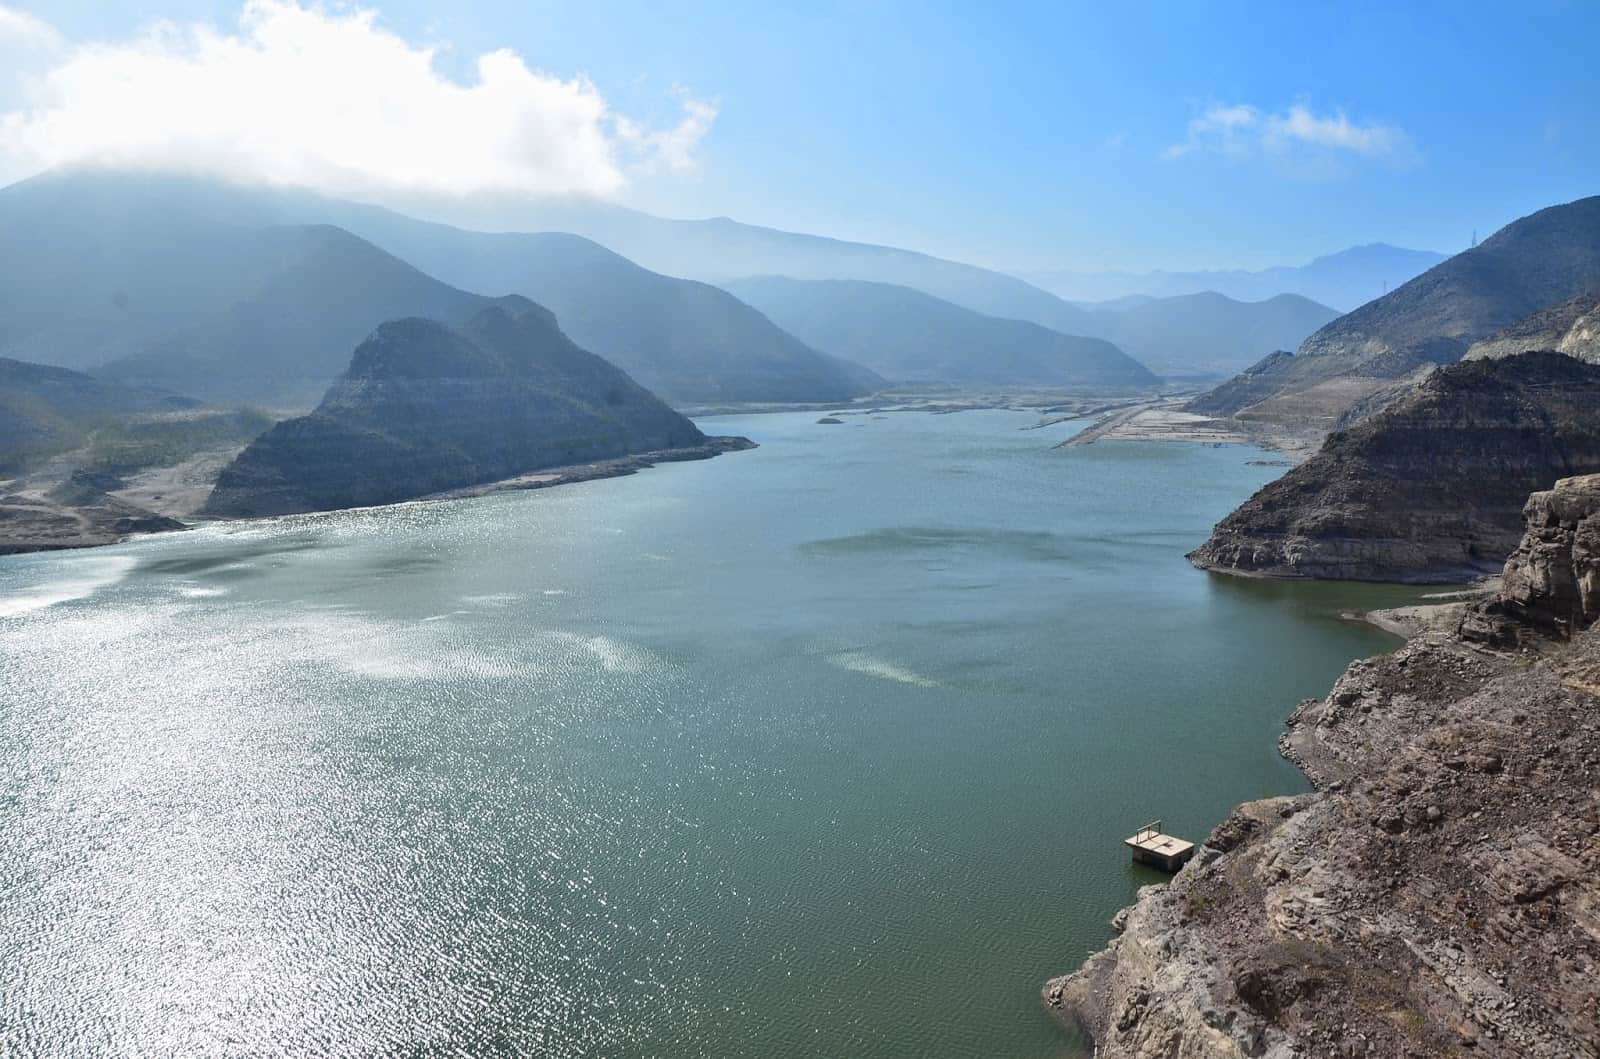 View from the dam in Elqui Valley, Chile